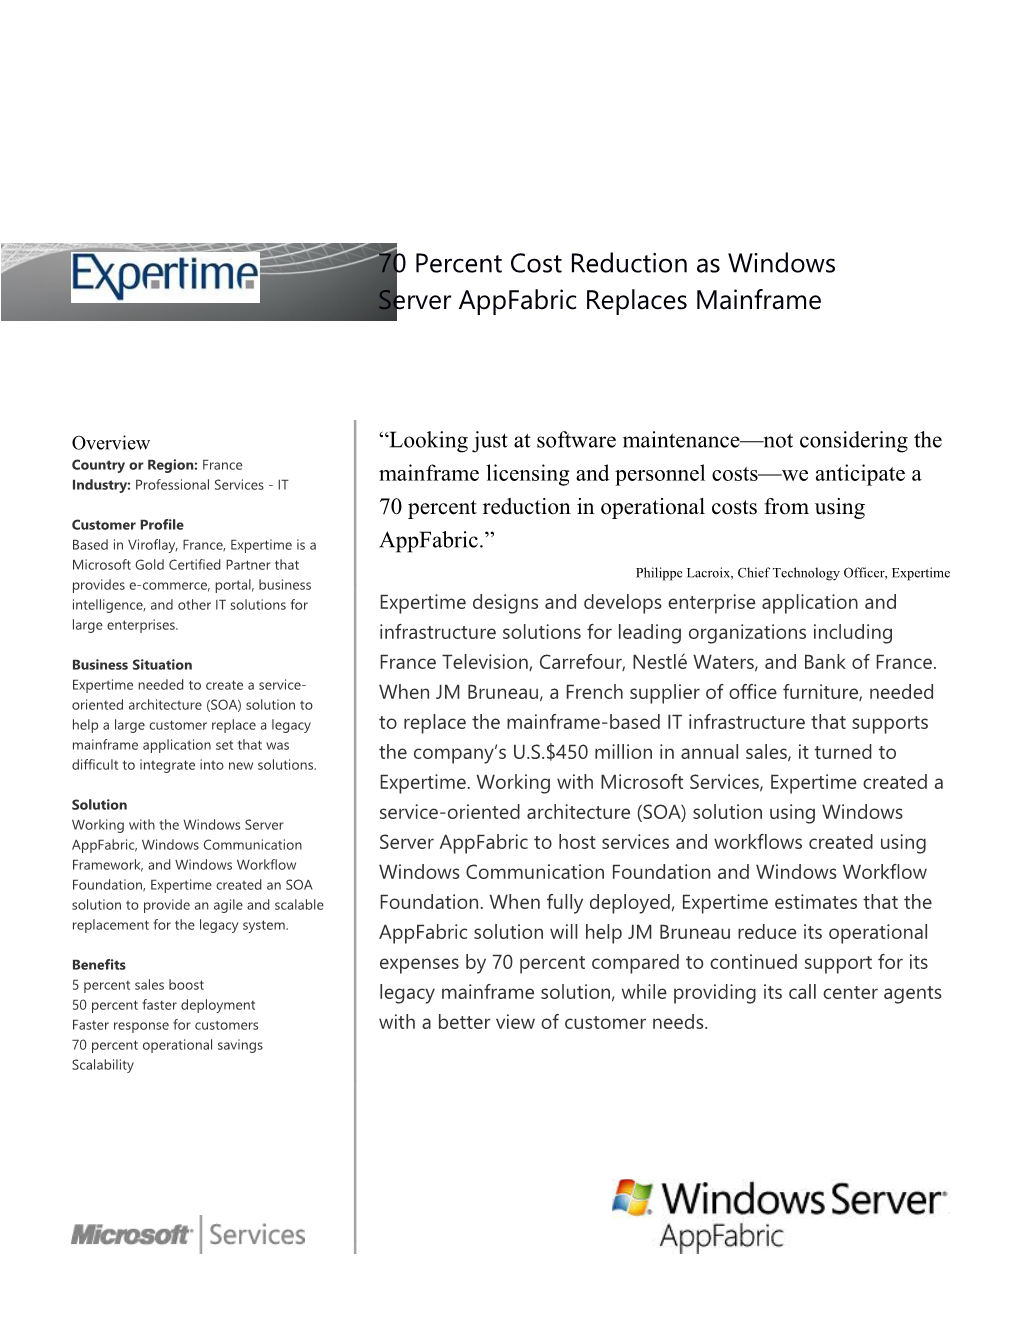 70 Percent Cost Reduction As Windows Server Appfabric Replaces Mainframe Solution